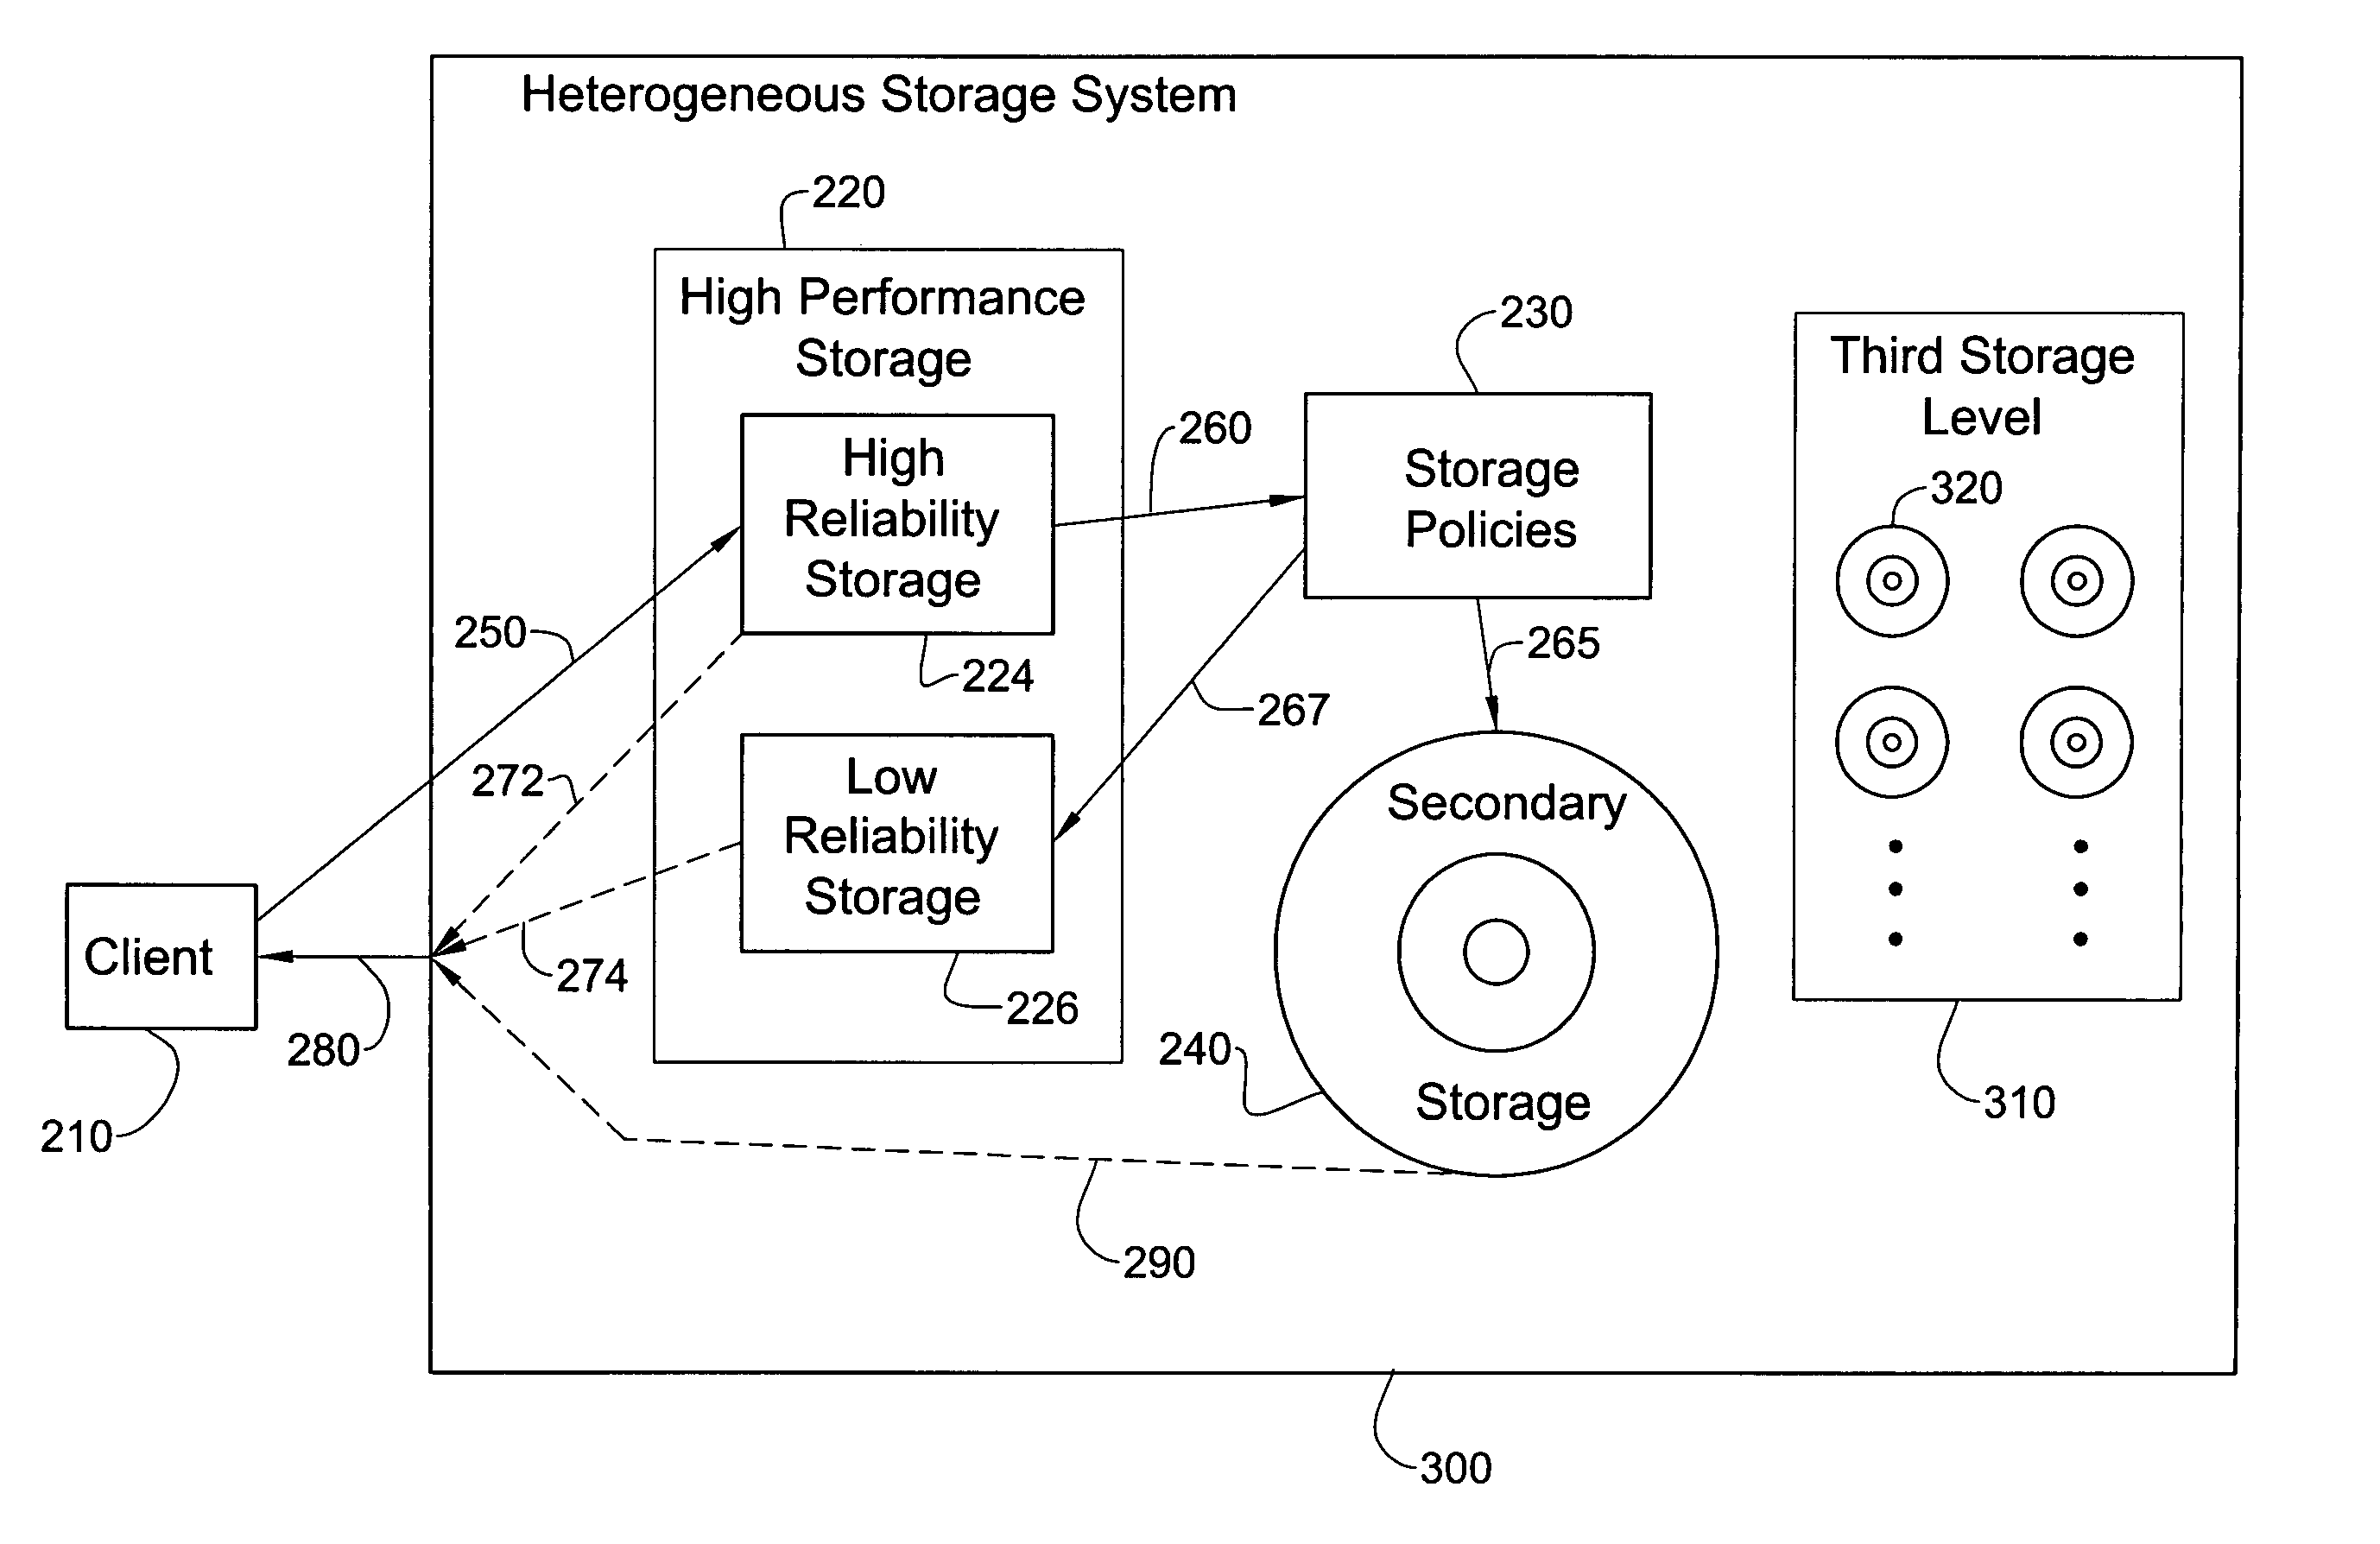 Inexpensive reliable computer storage via hetero-geneous architecture and a staged storage policy